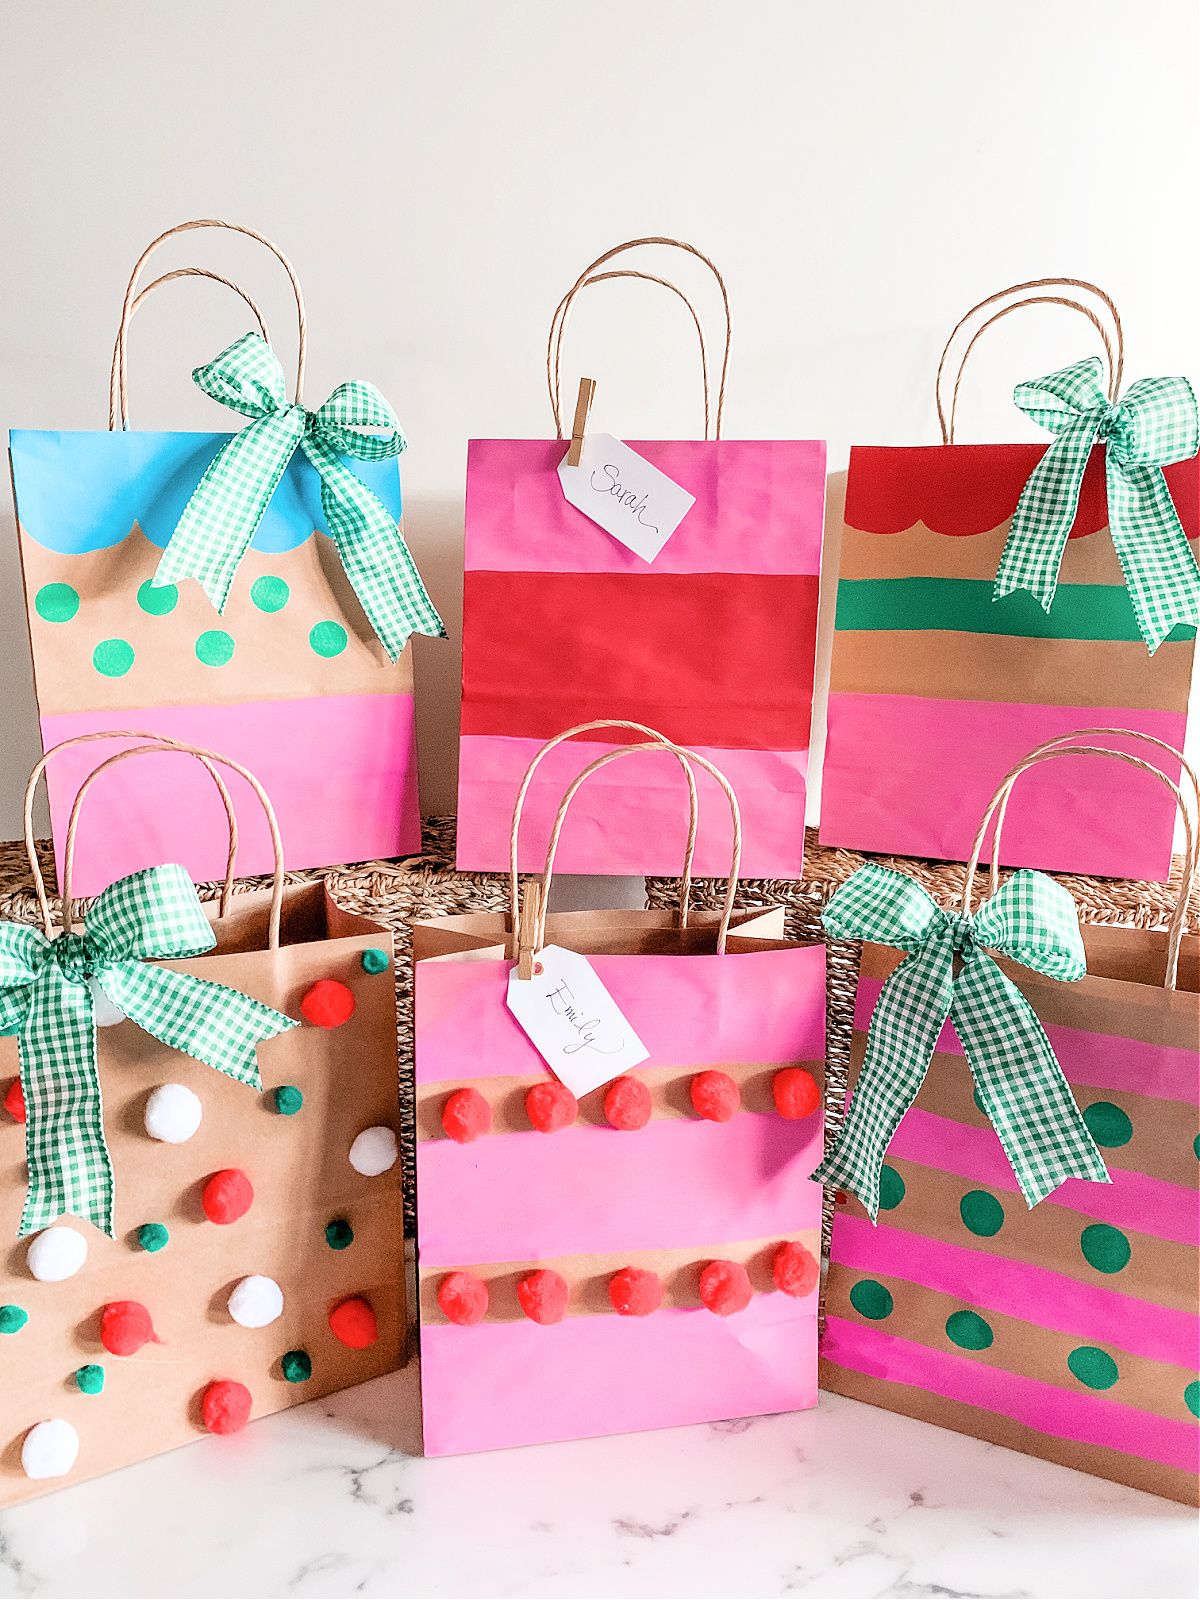 Giftology: How to Fill a Gift Bag with Tissue 